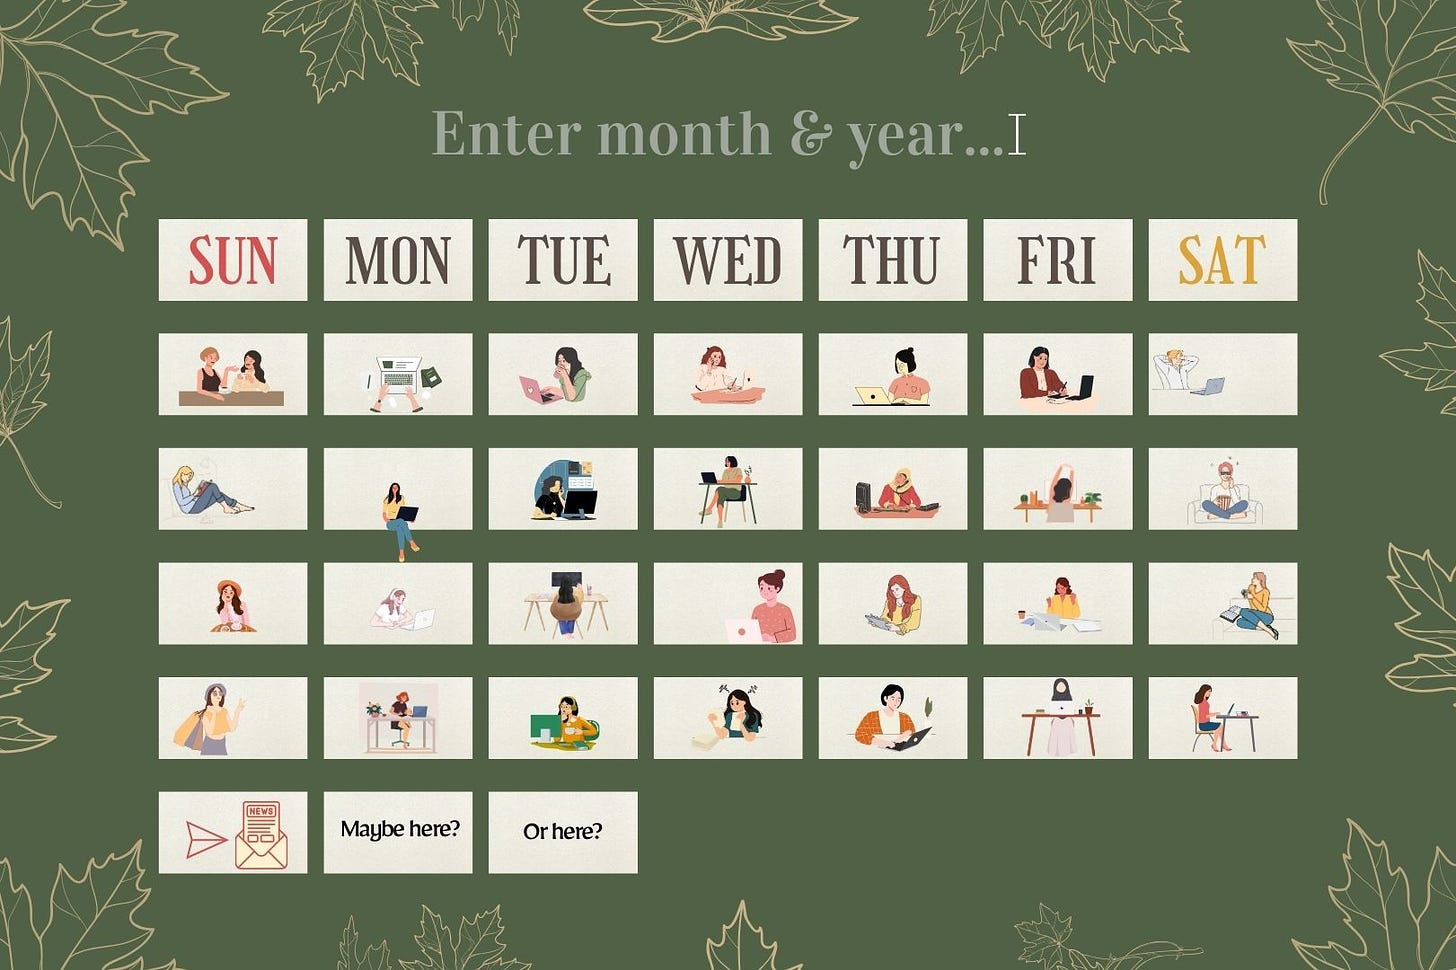 An empty calendar with daily activities visually illustrated on each day.